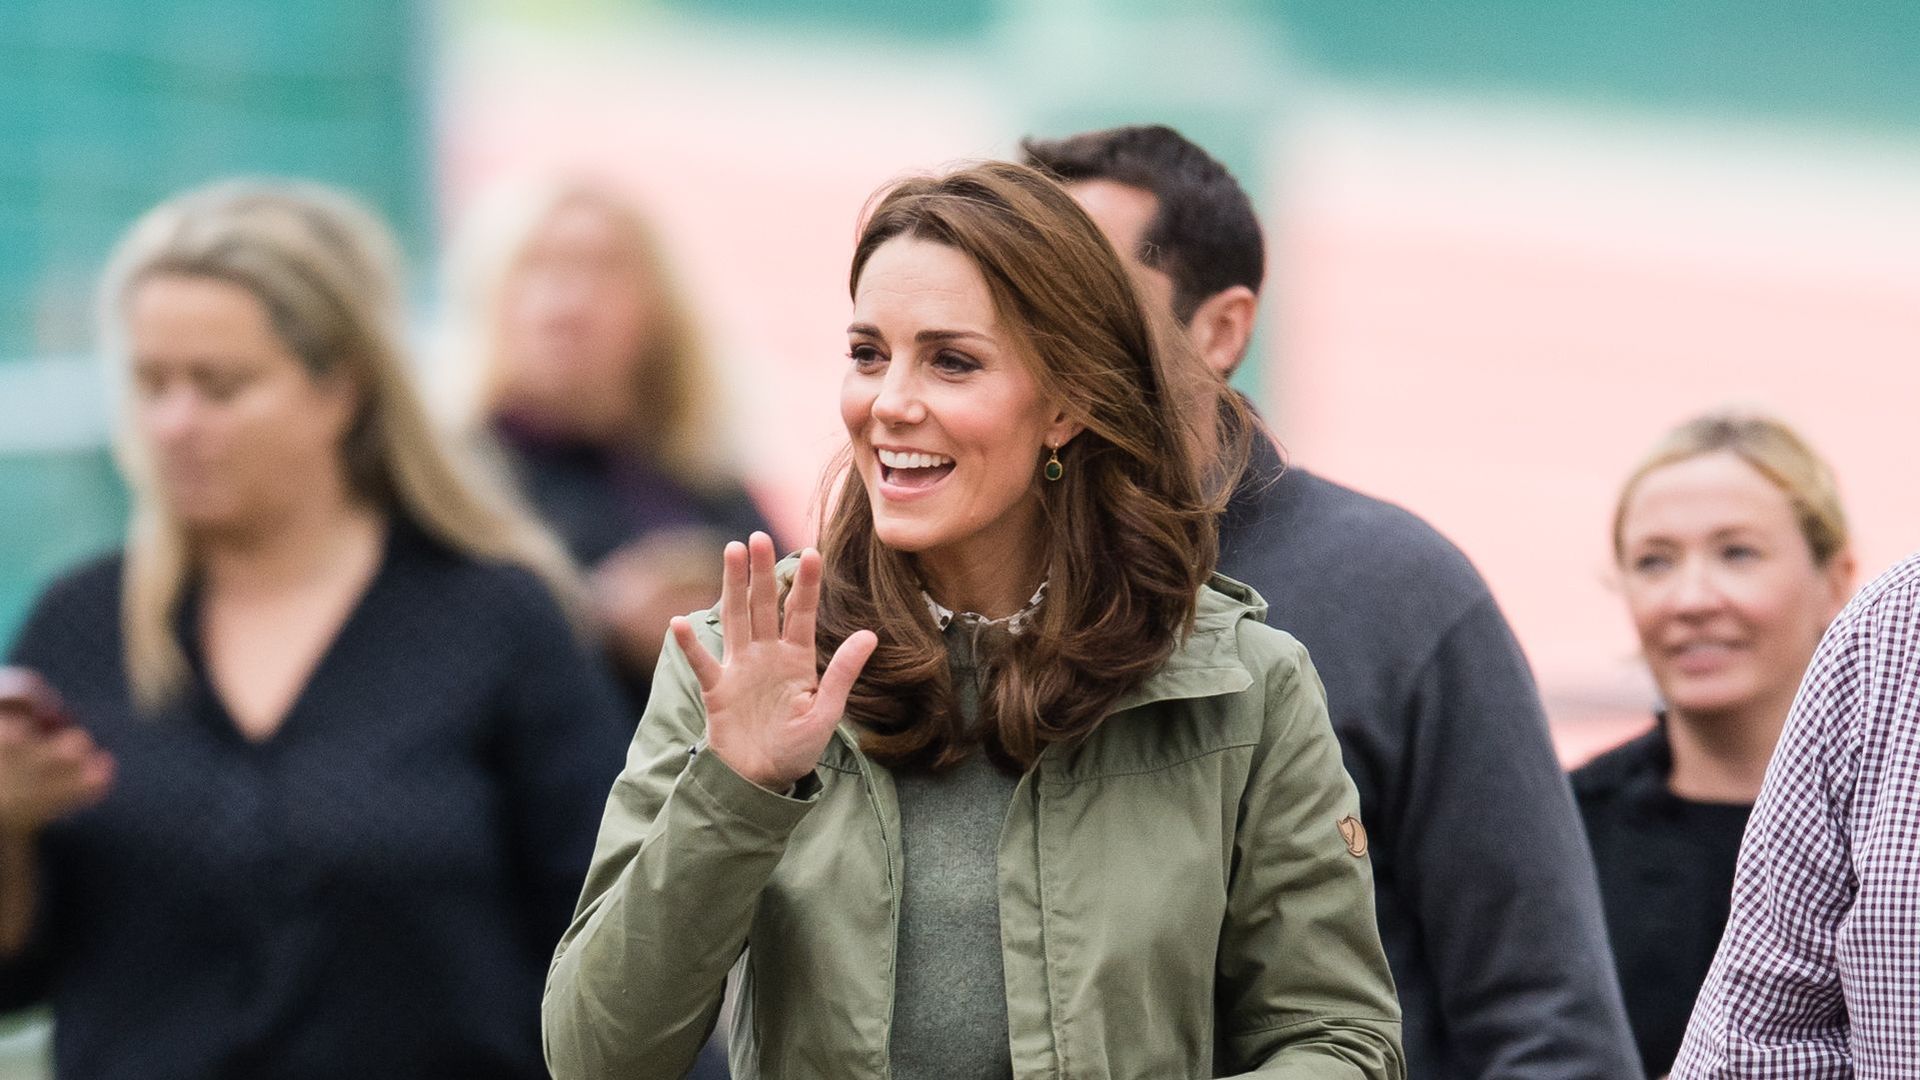 Kate Middleton Wears a Green Fjallraven Jacket to Visit the Sayers ...